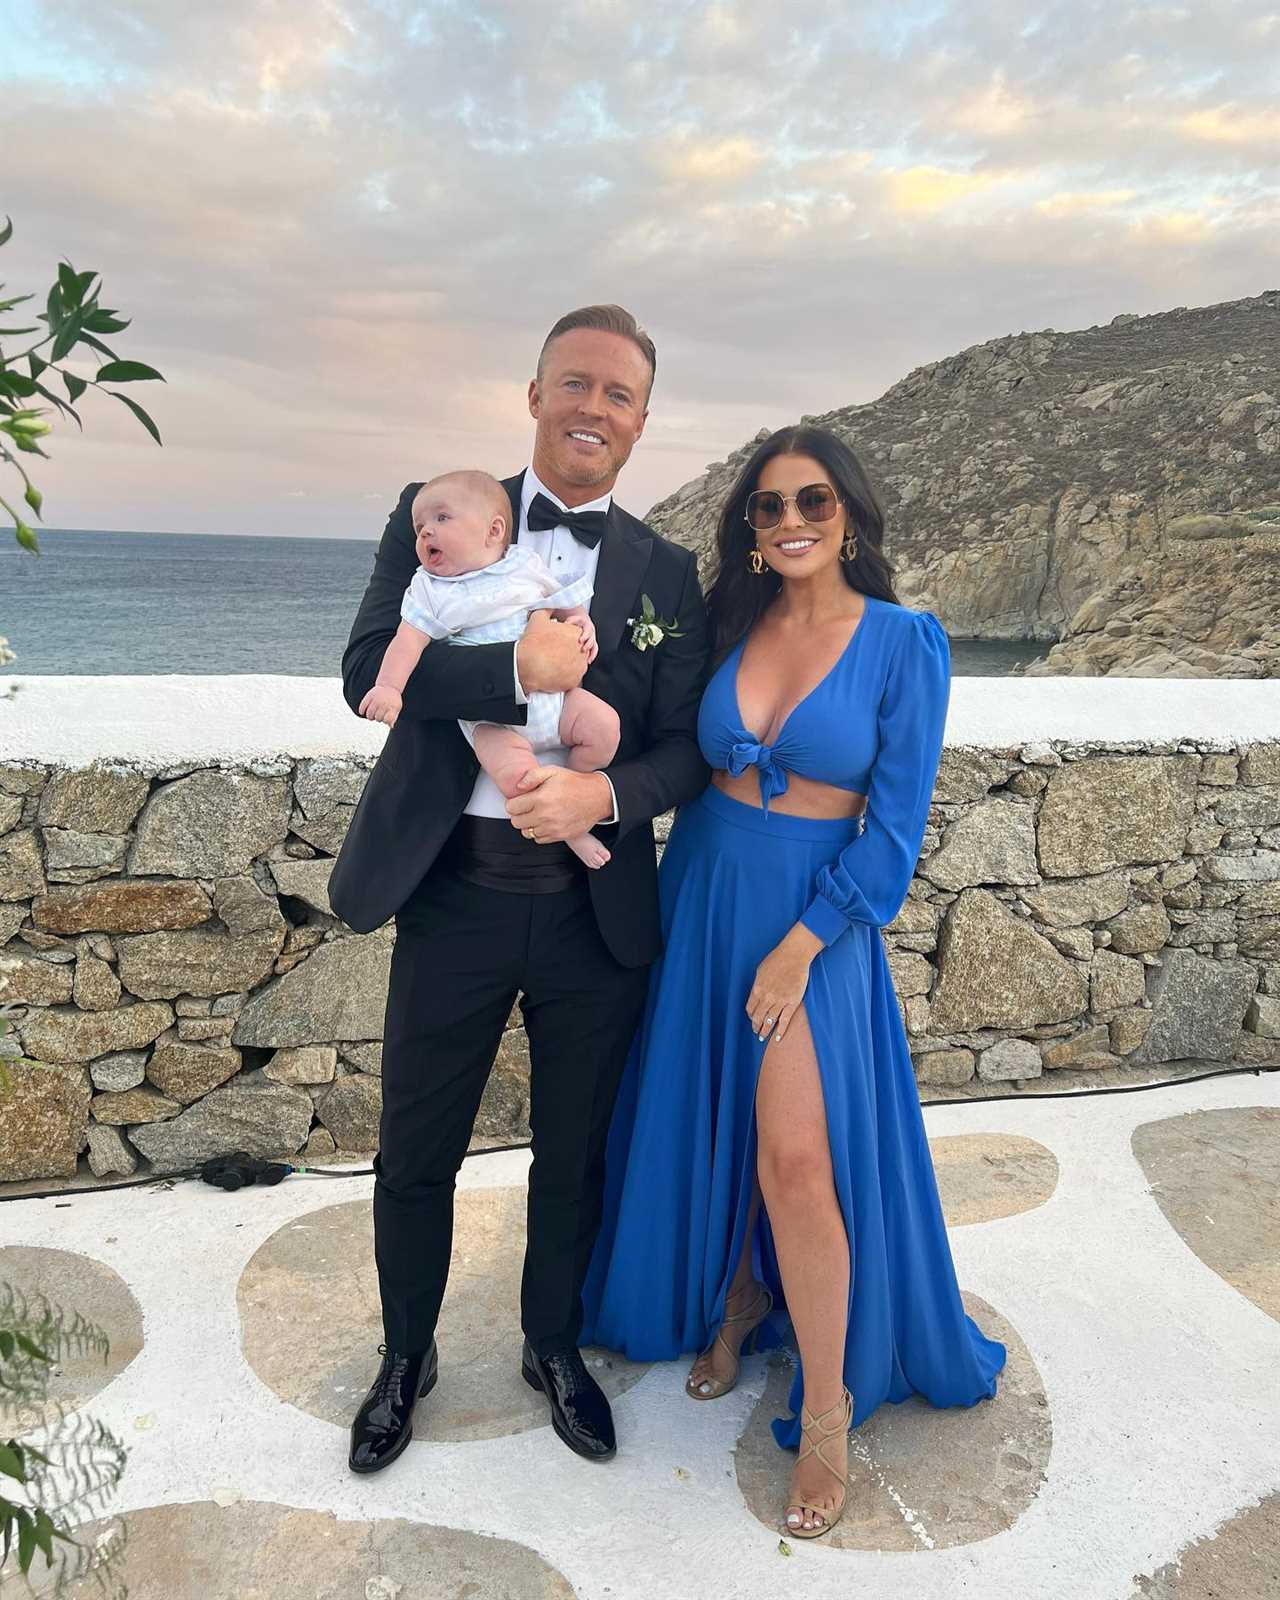 Jess Wright reveals she suffered from post-natal depression after birth of baby boy